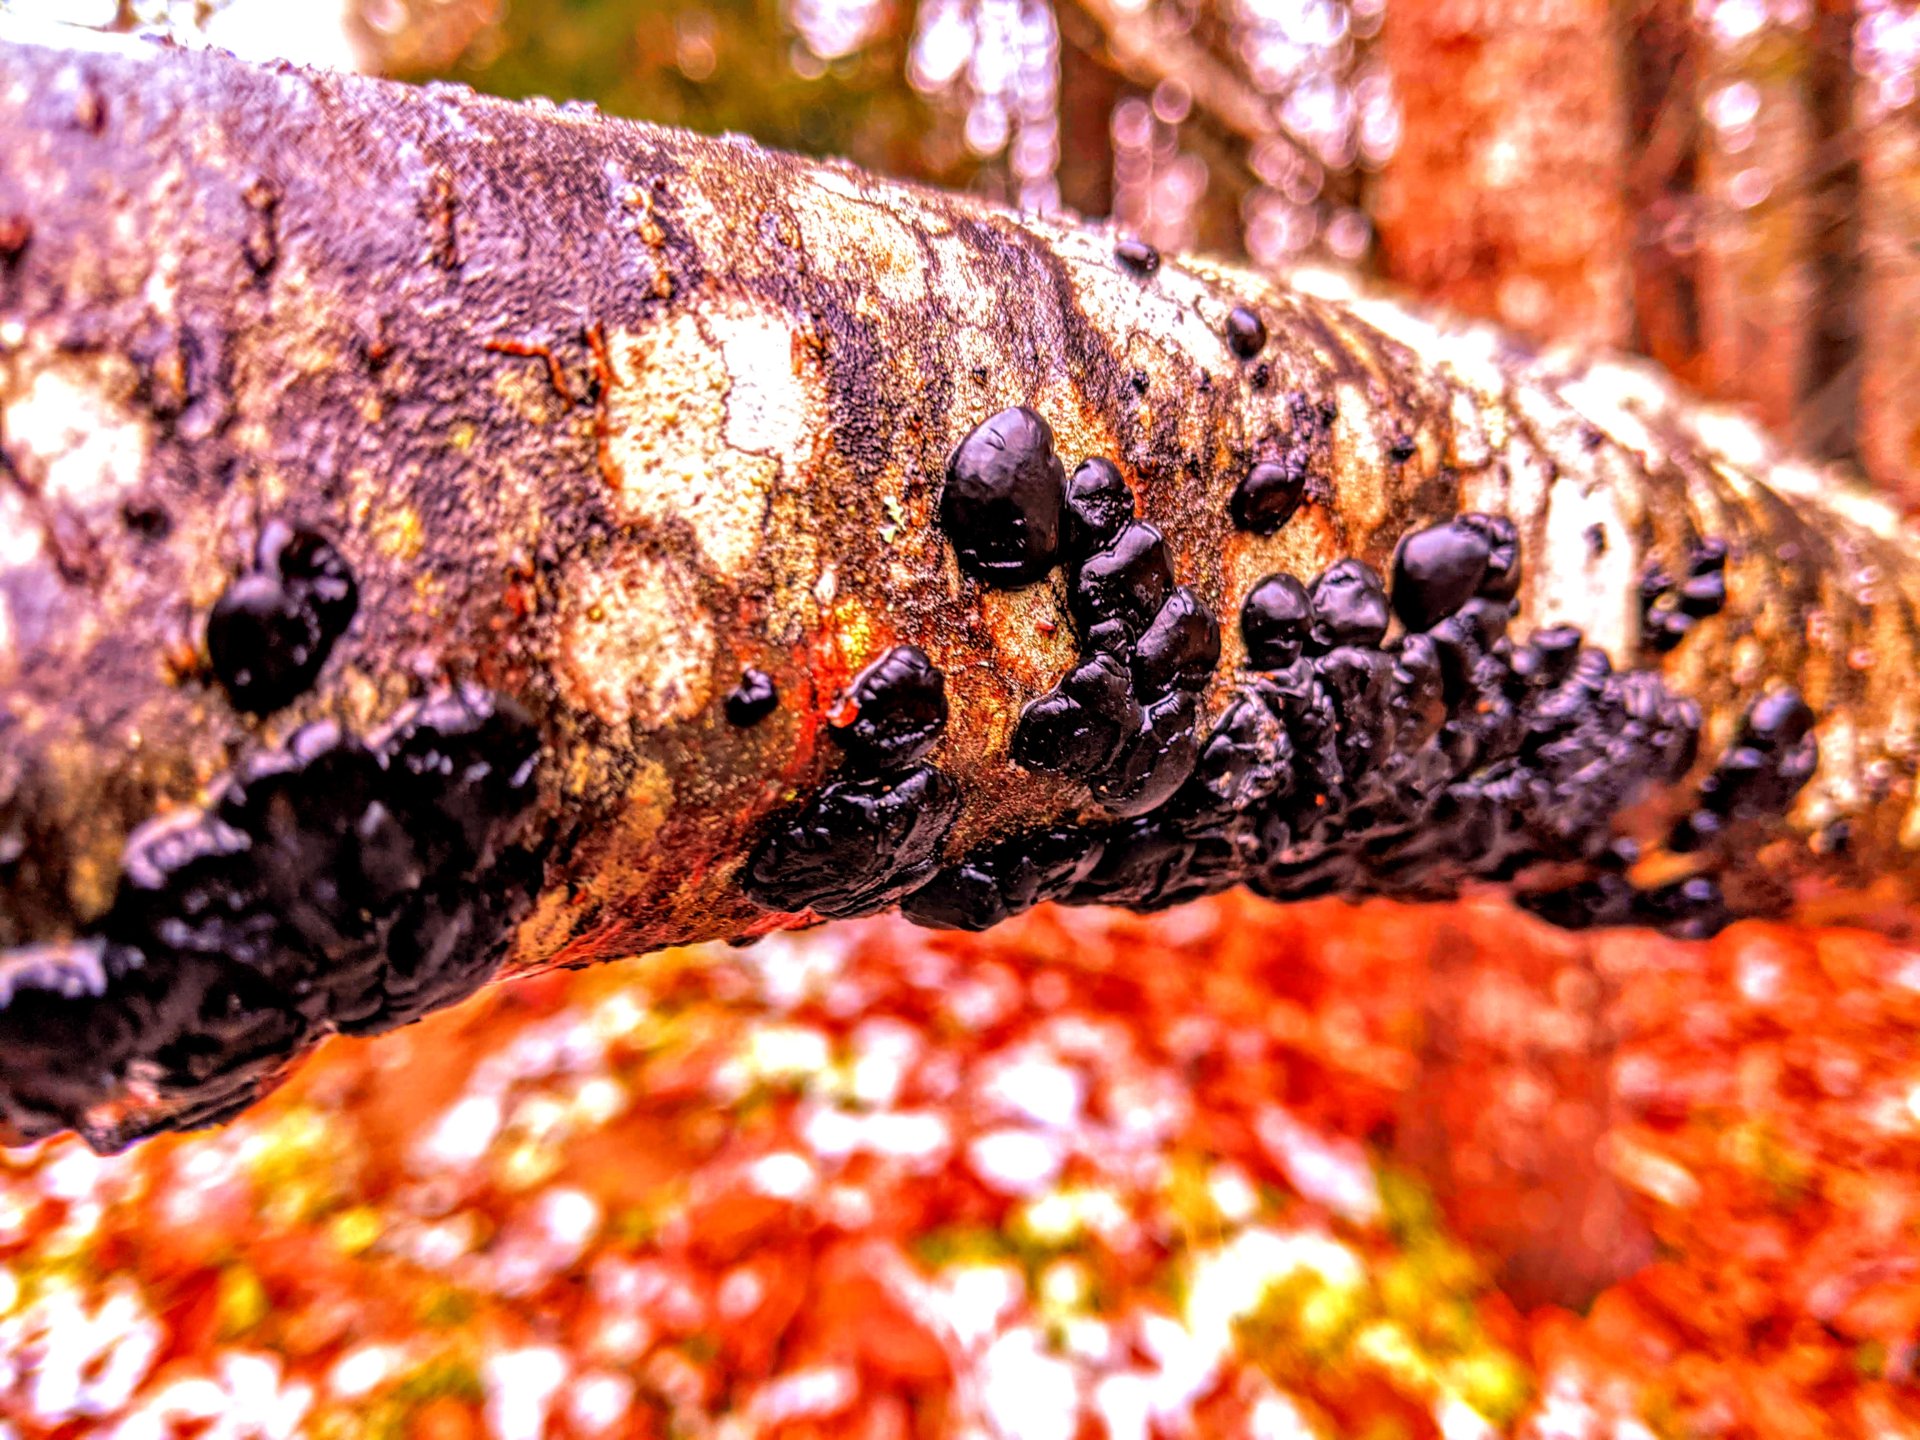 Black, shinny mushrooms growing on the side of a tree branch in Downeast, Maine,